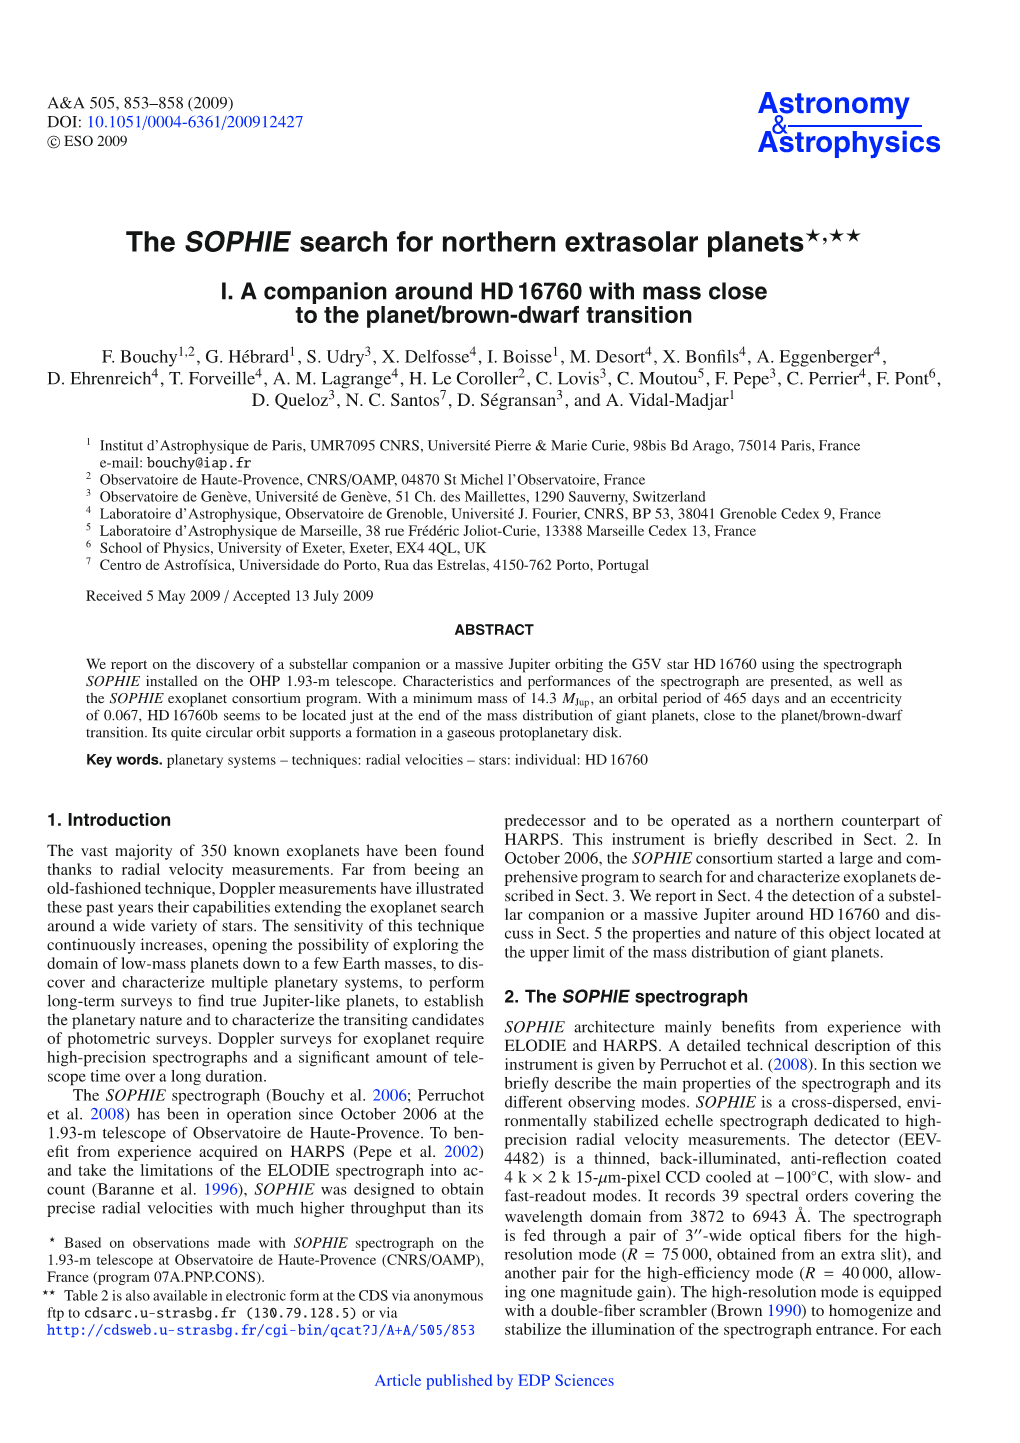 The SOPHIE Search for Northern Extrasolar Planets!,!! I